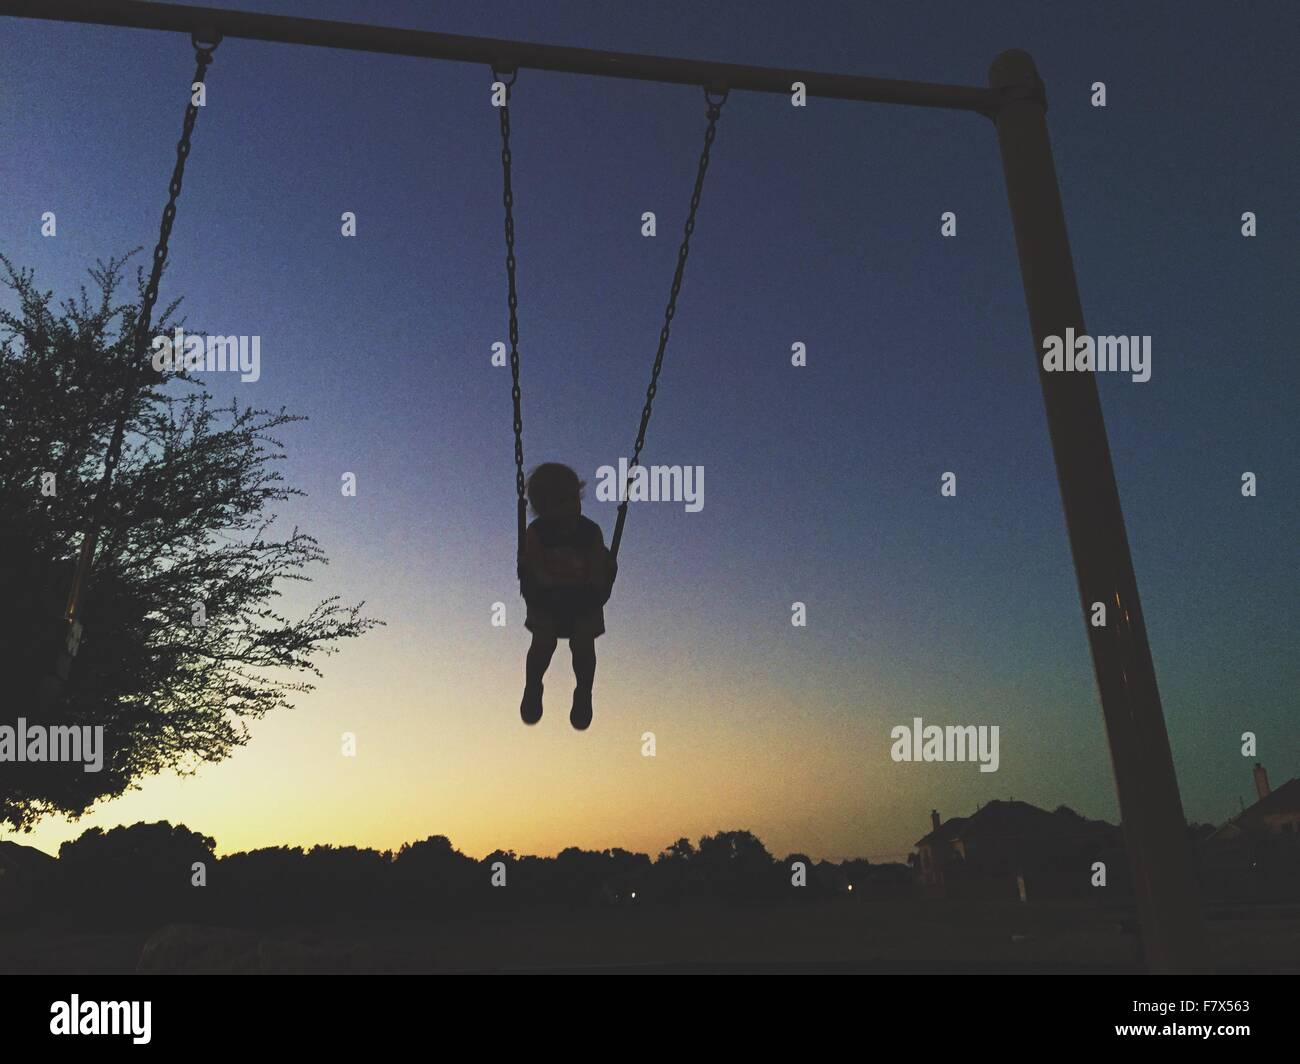 Silhouette of a toddler on swing in sunset Stock Photo